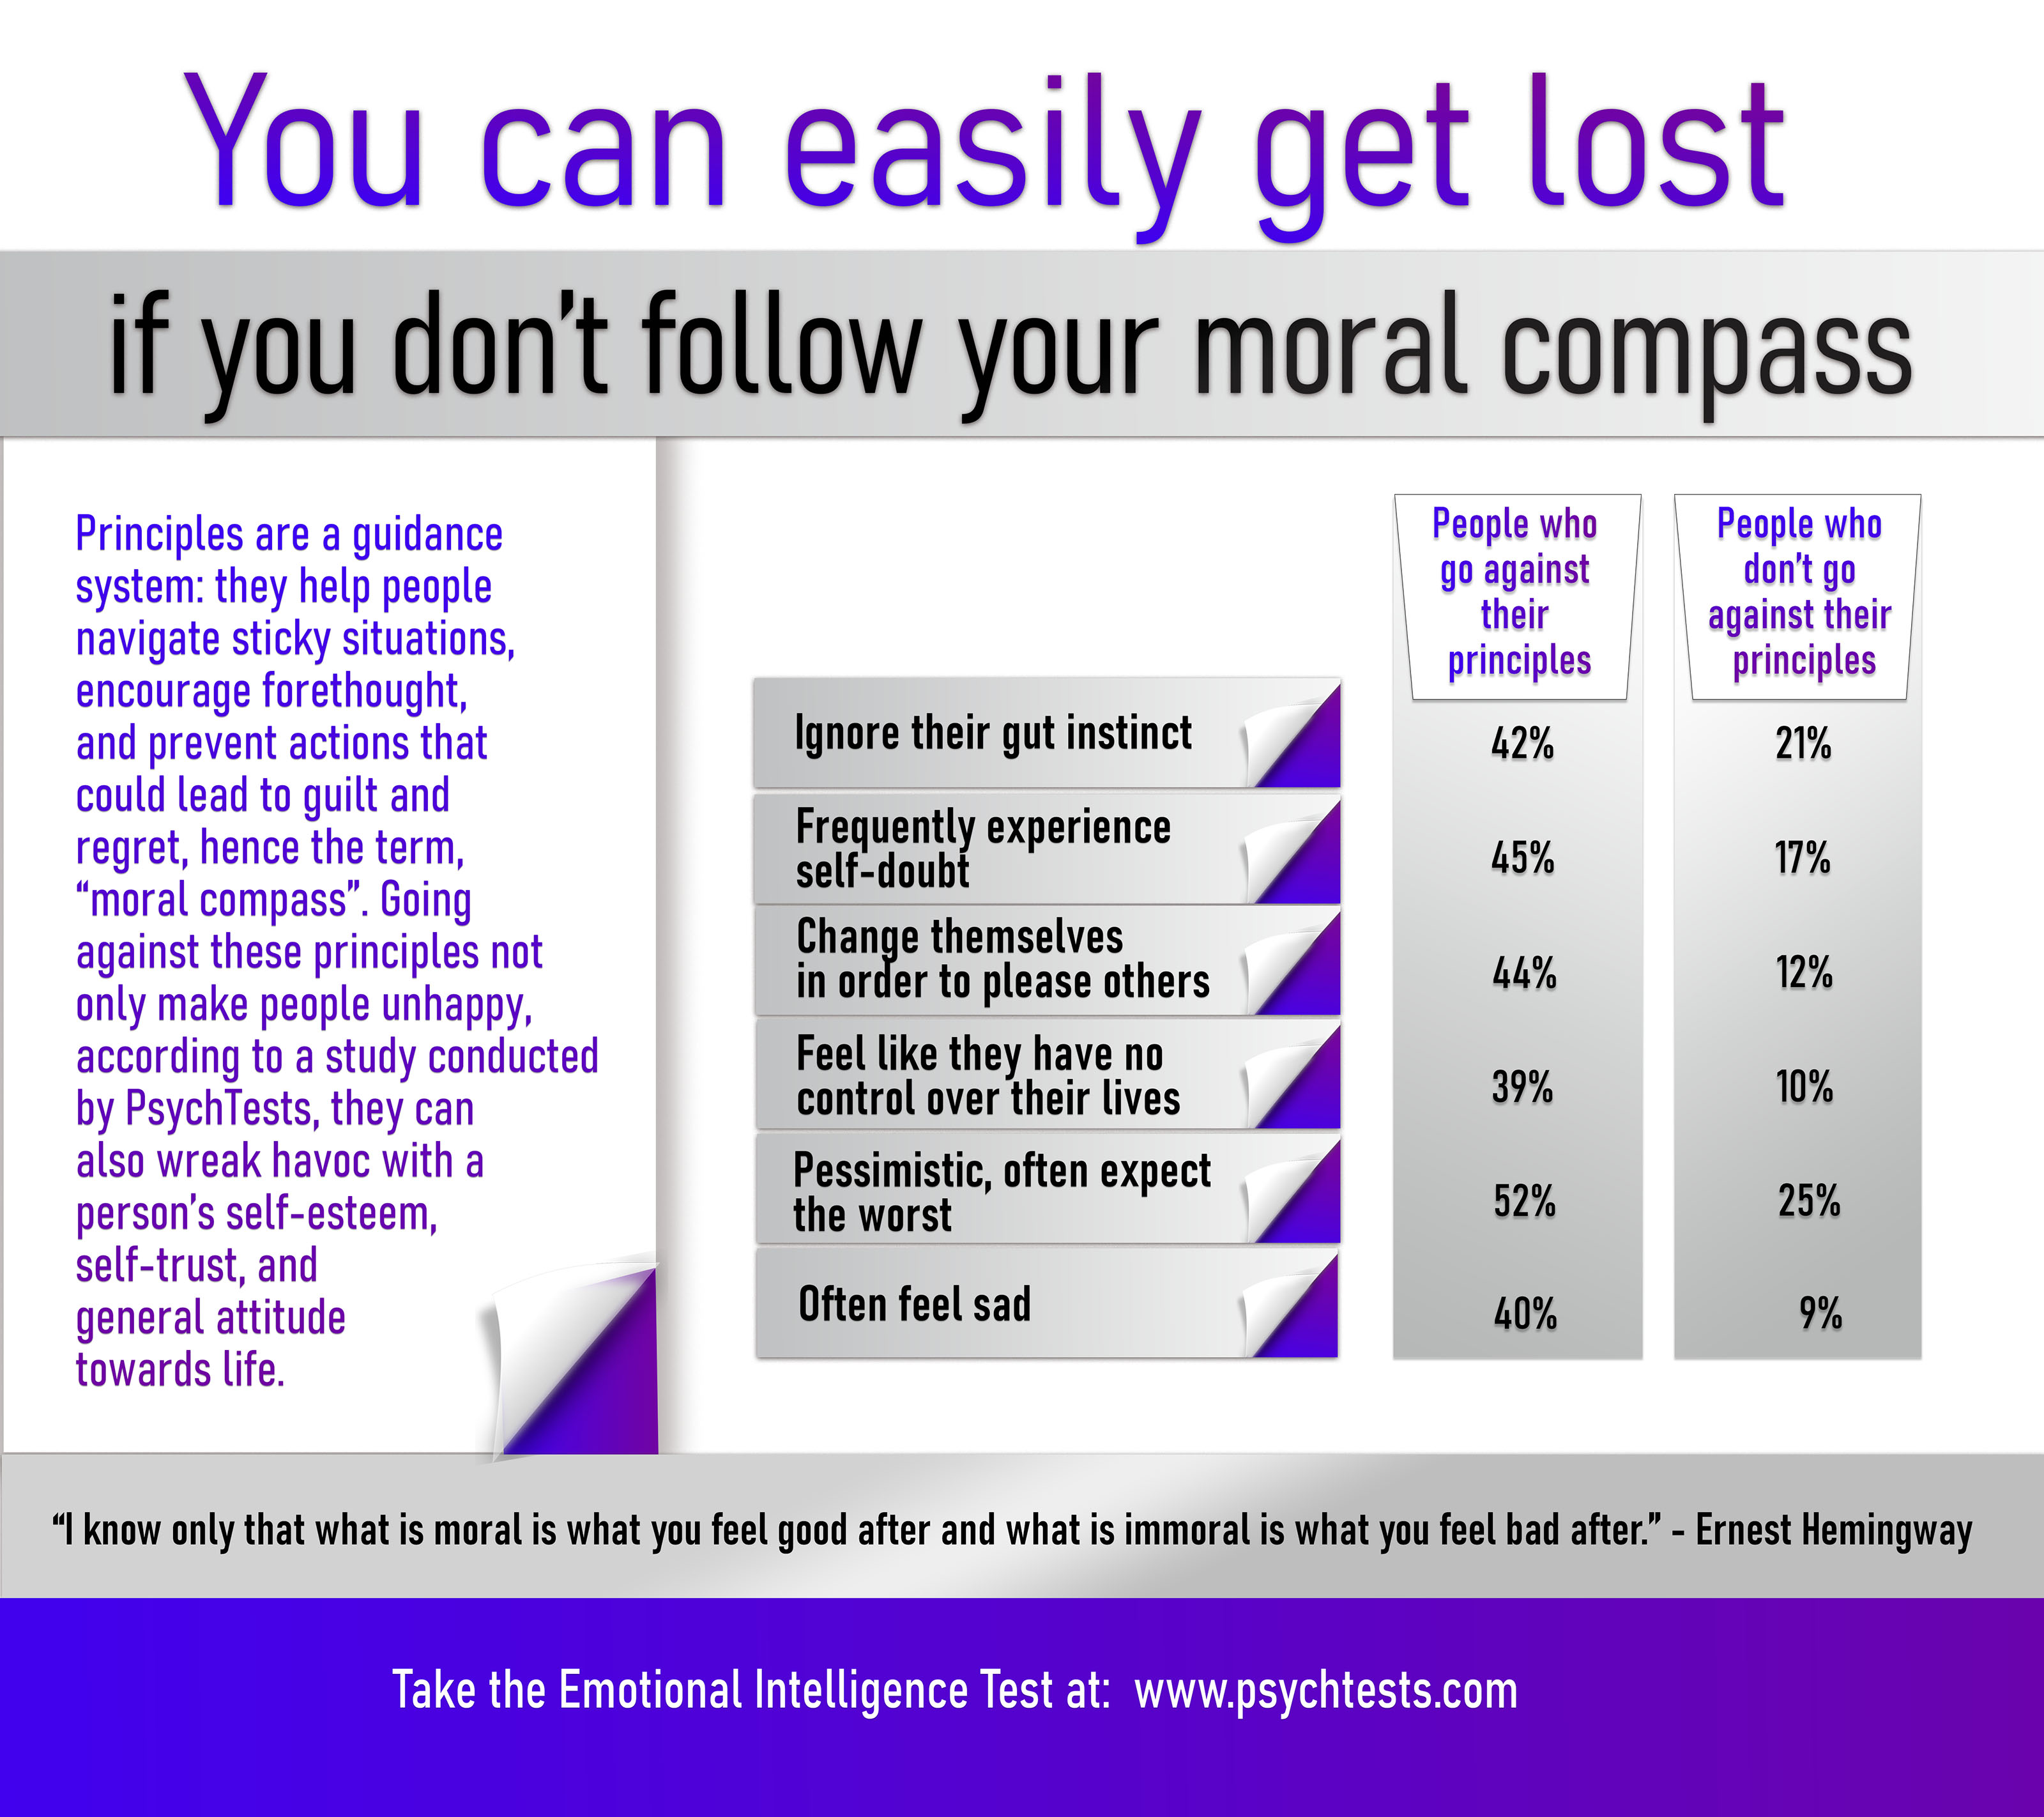 Having a moral compass not only guides you down the right path, it will also make you feel better about yourself.